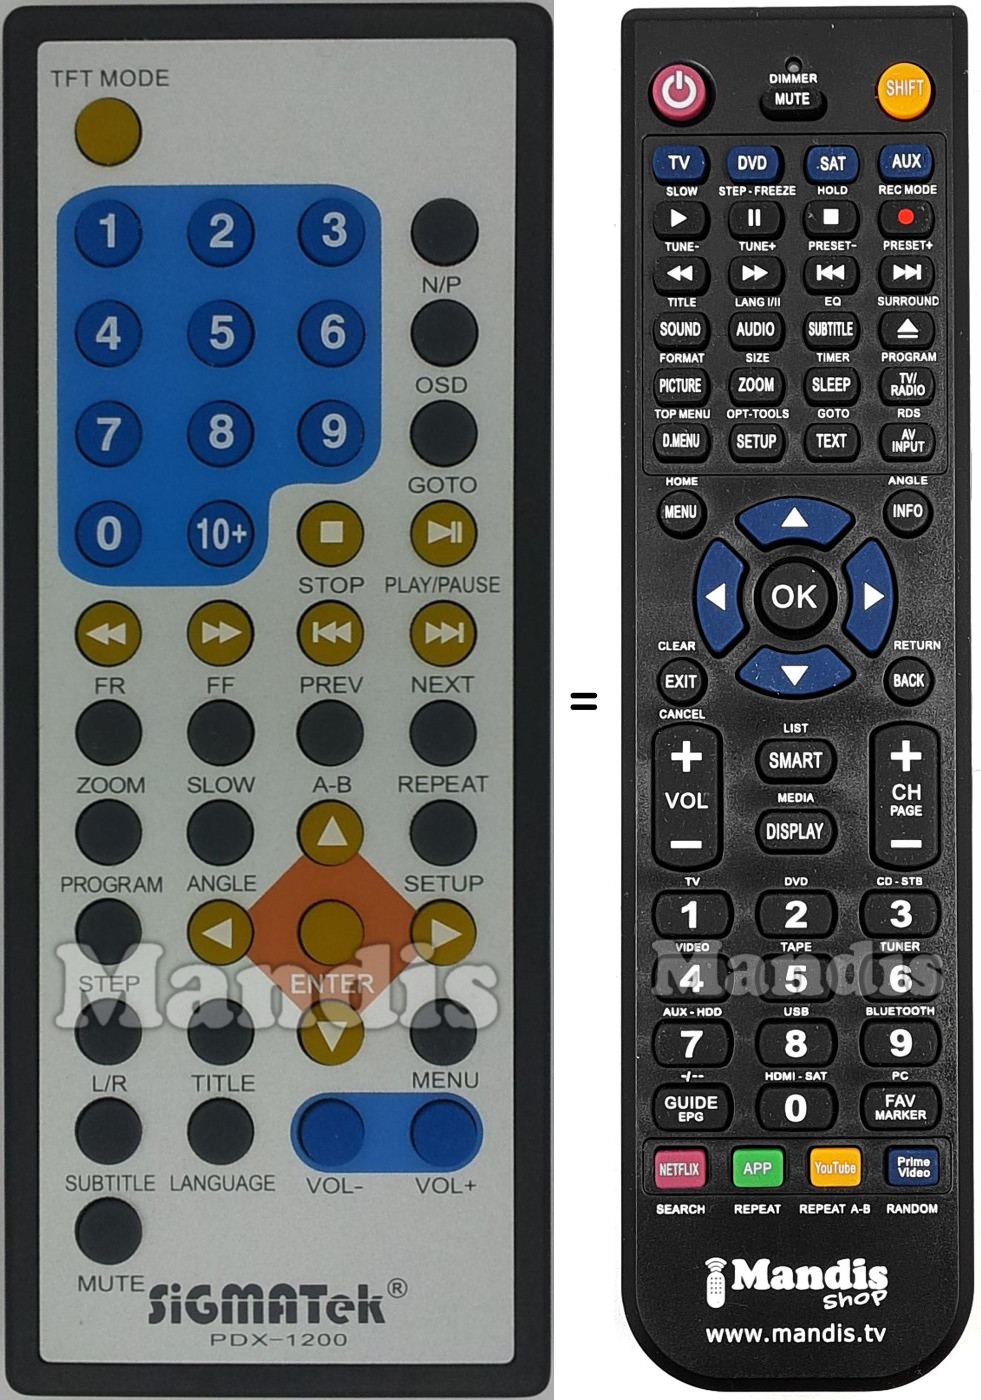 Replacement remote control Sigmatek PDX-1200